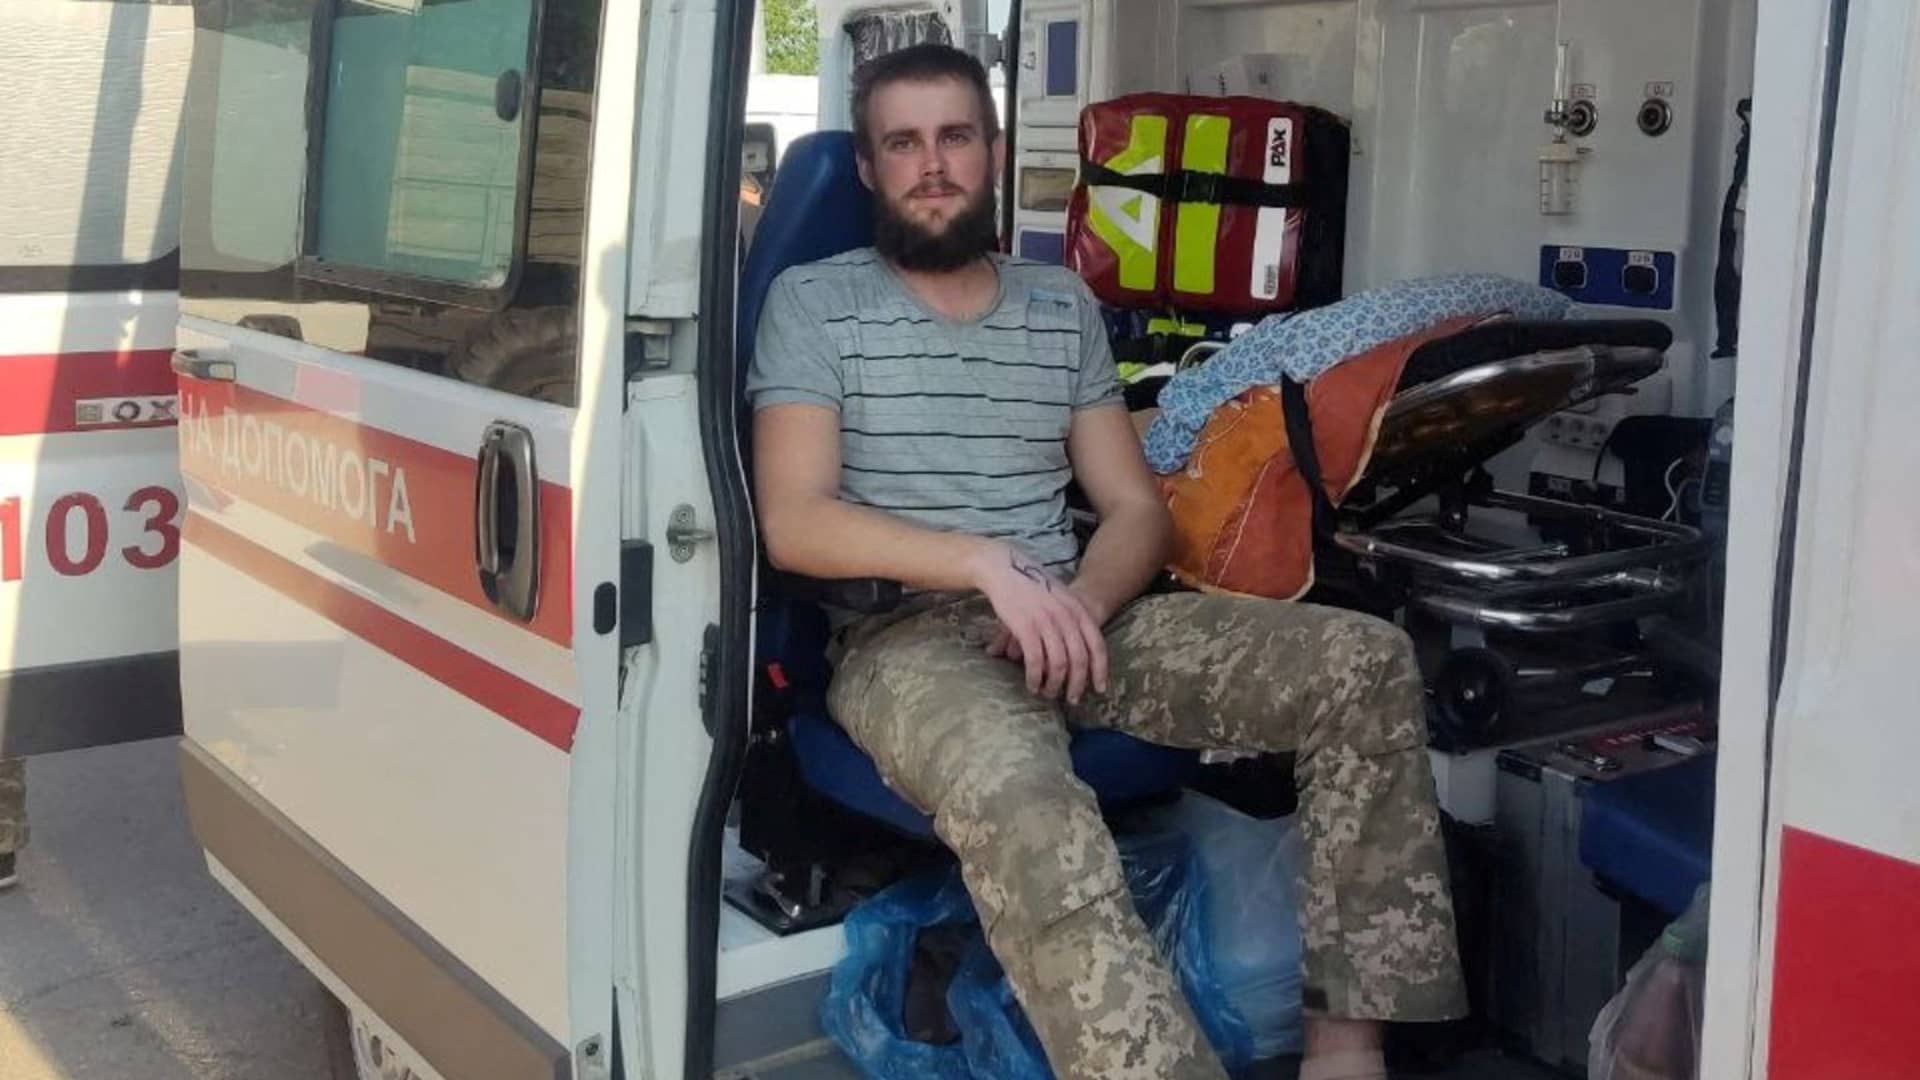 A Ukrainian soldier sits in an ambulance as Ukraine carries out an exchange of prisoners, amid Russia's invasion, at a location given as Zaporizhzhia region, Ukraine, in this handout photo released on June 29, 2022. 